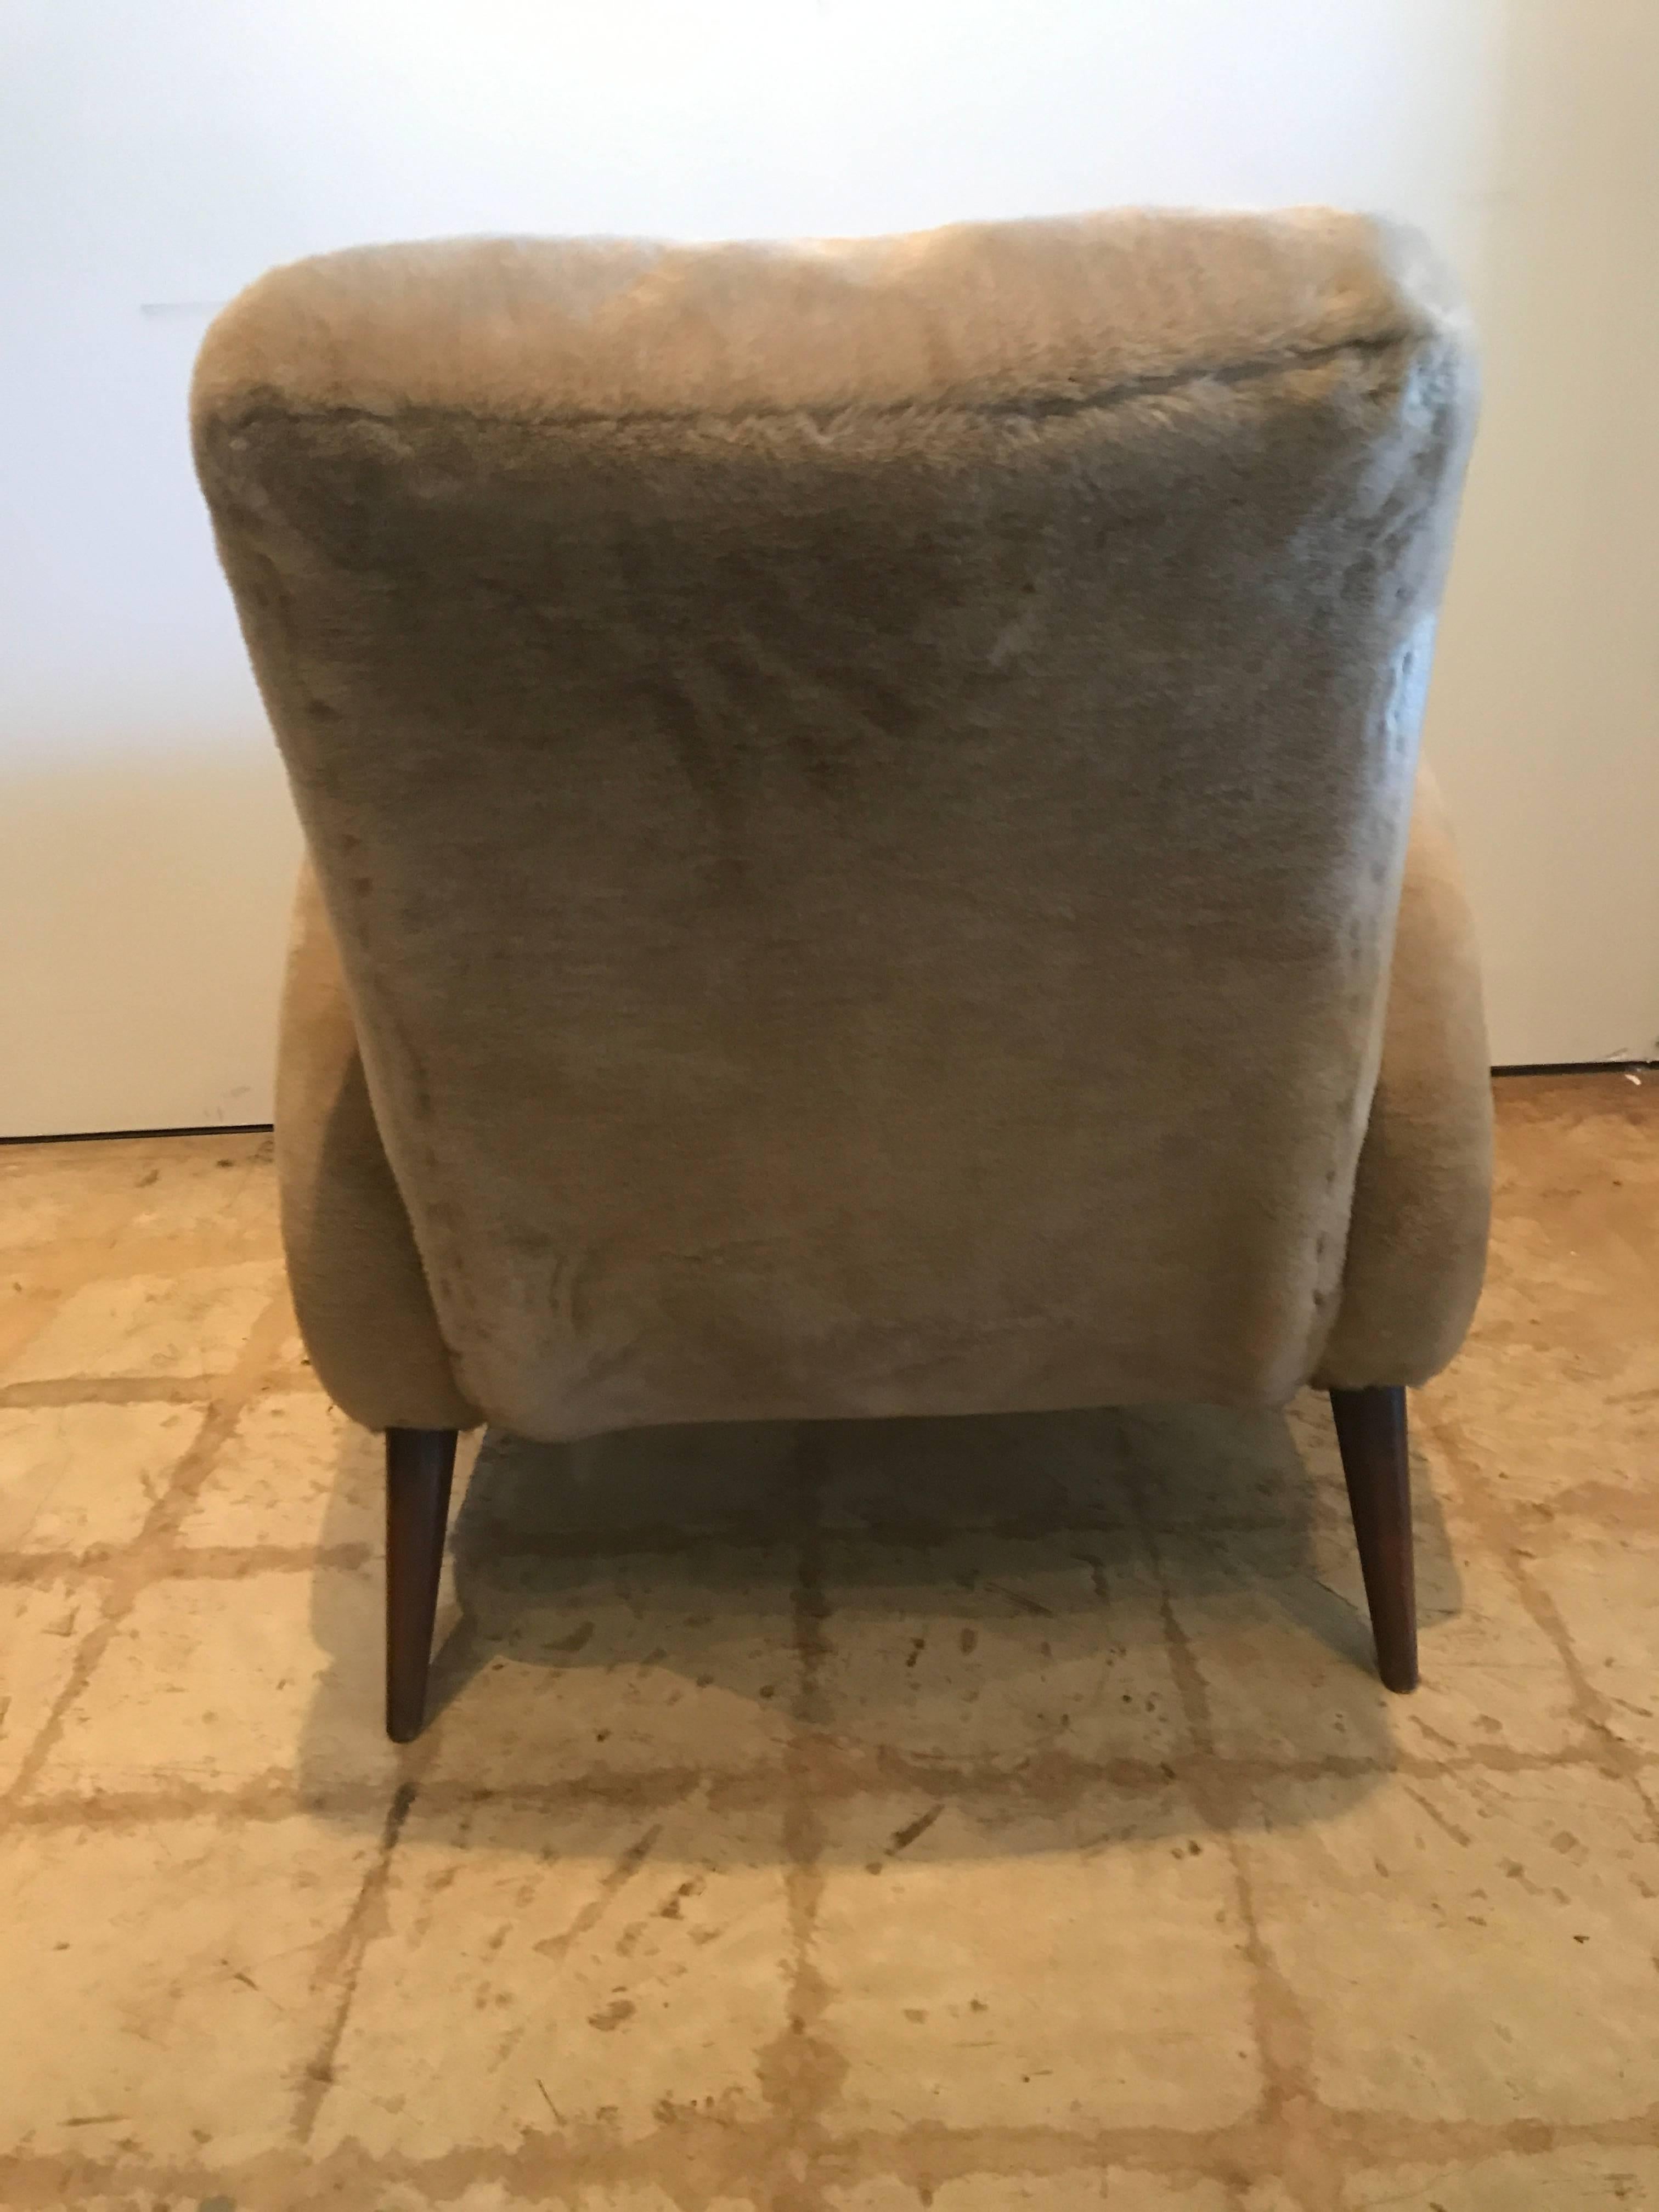 Fully upholstered in original "polar bear" fabric on splayed walnut legs.
Literature- jean royere- jean-louis gaillemin
jean royere- jacques lacoste, patrick seguin.